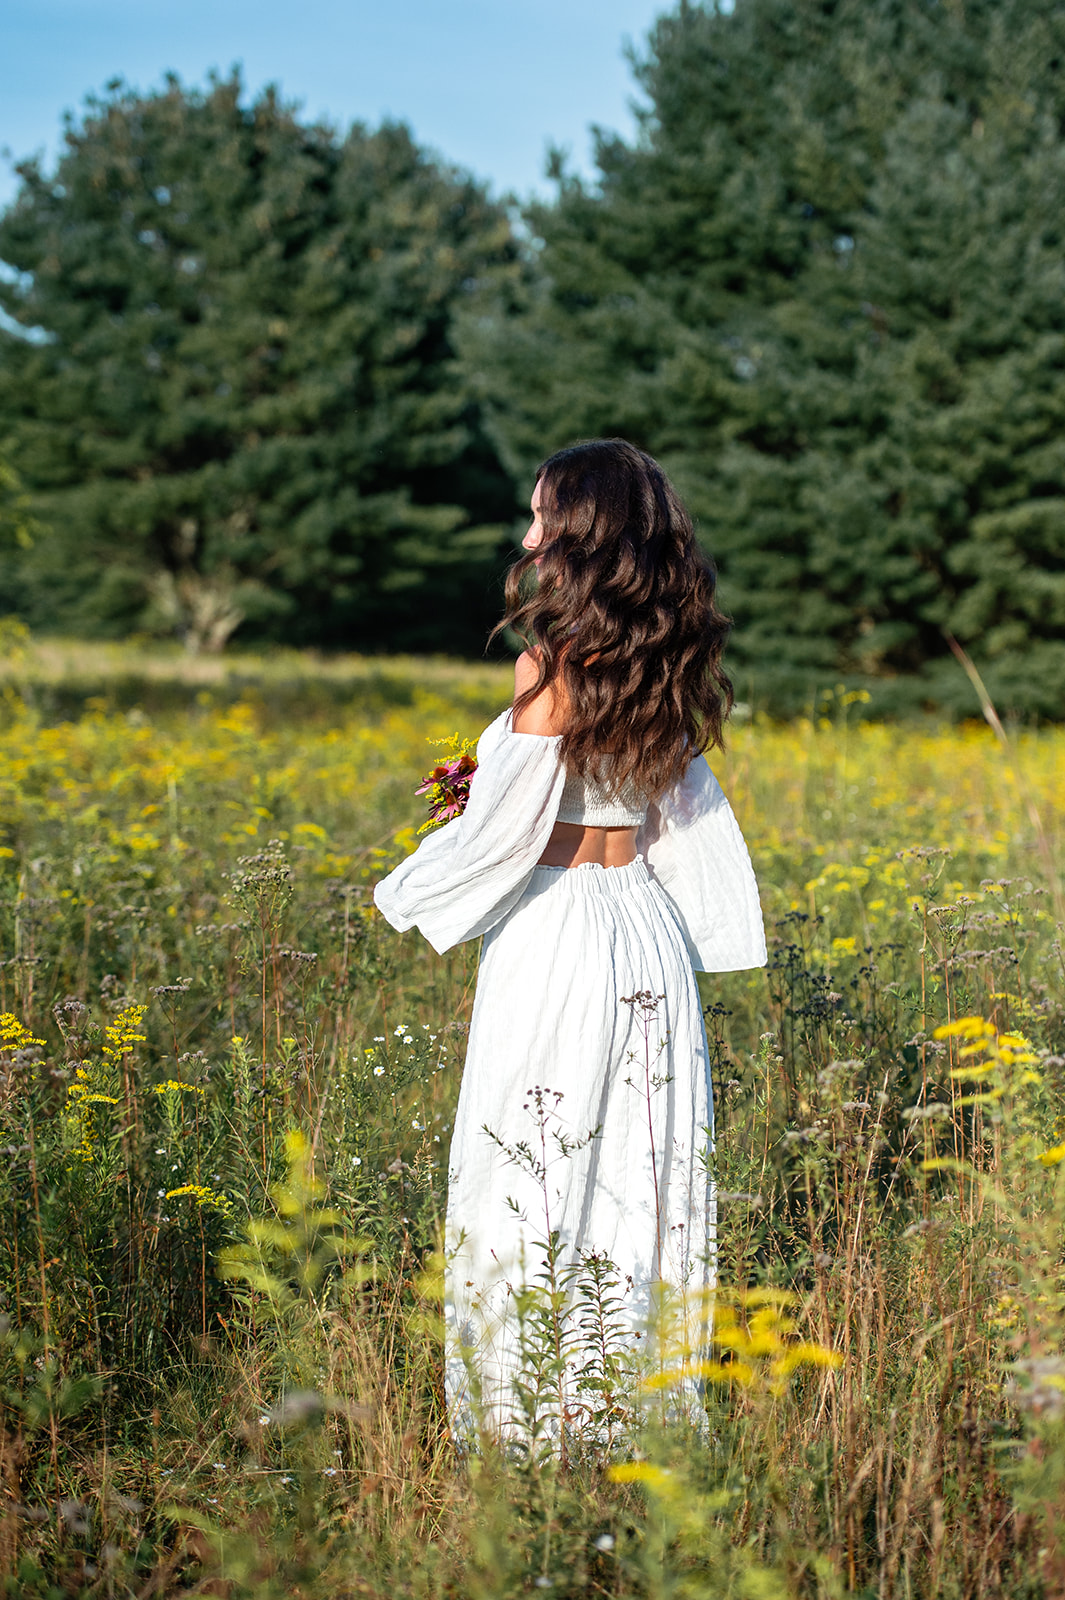 Brown-haired high school senior girl twirling in a field of wildflowers while her dress and hair flow through the air. 